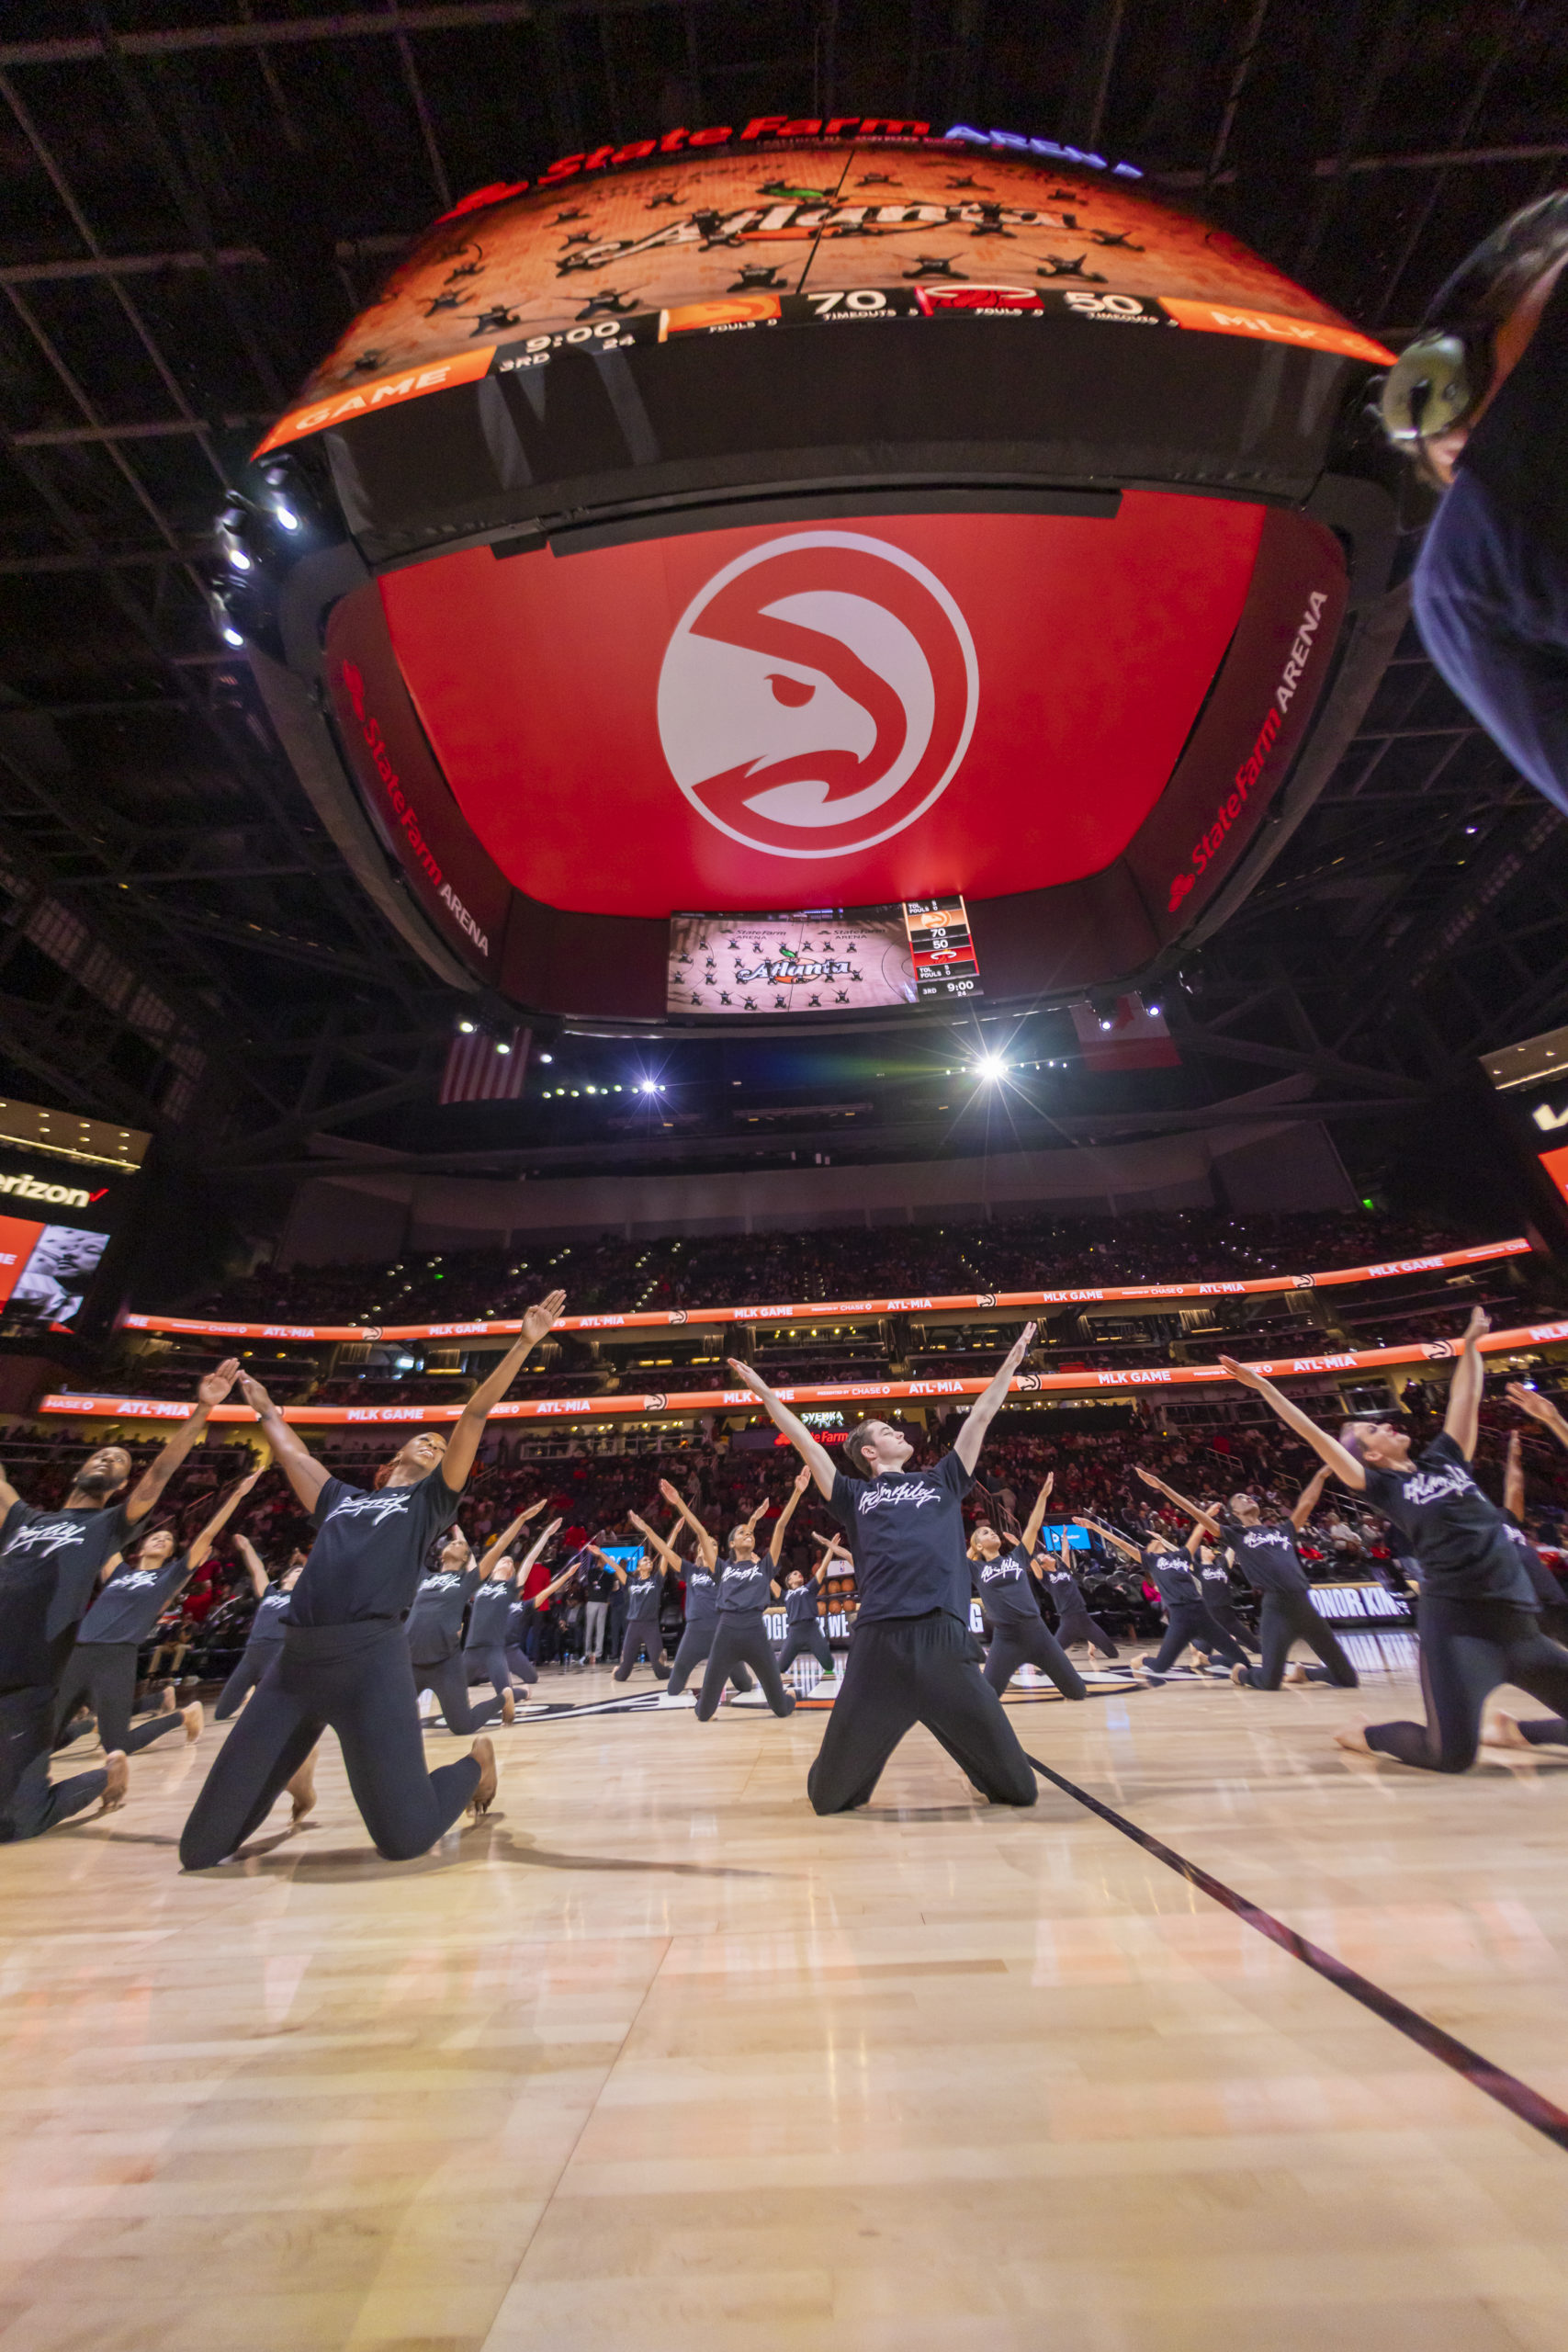 Could 2020 election be affected by Atlanta Hawks' State Farm Arena?